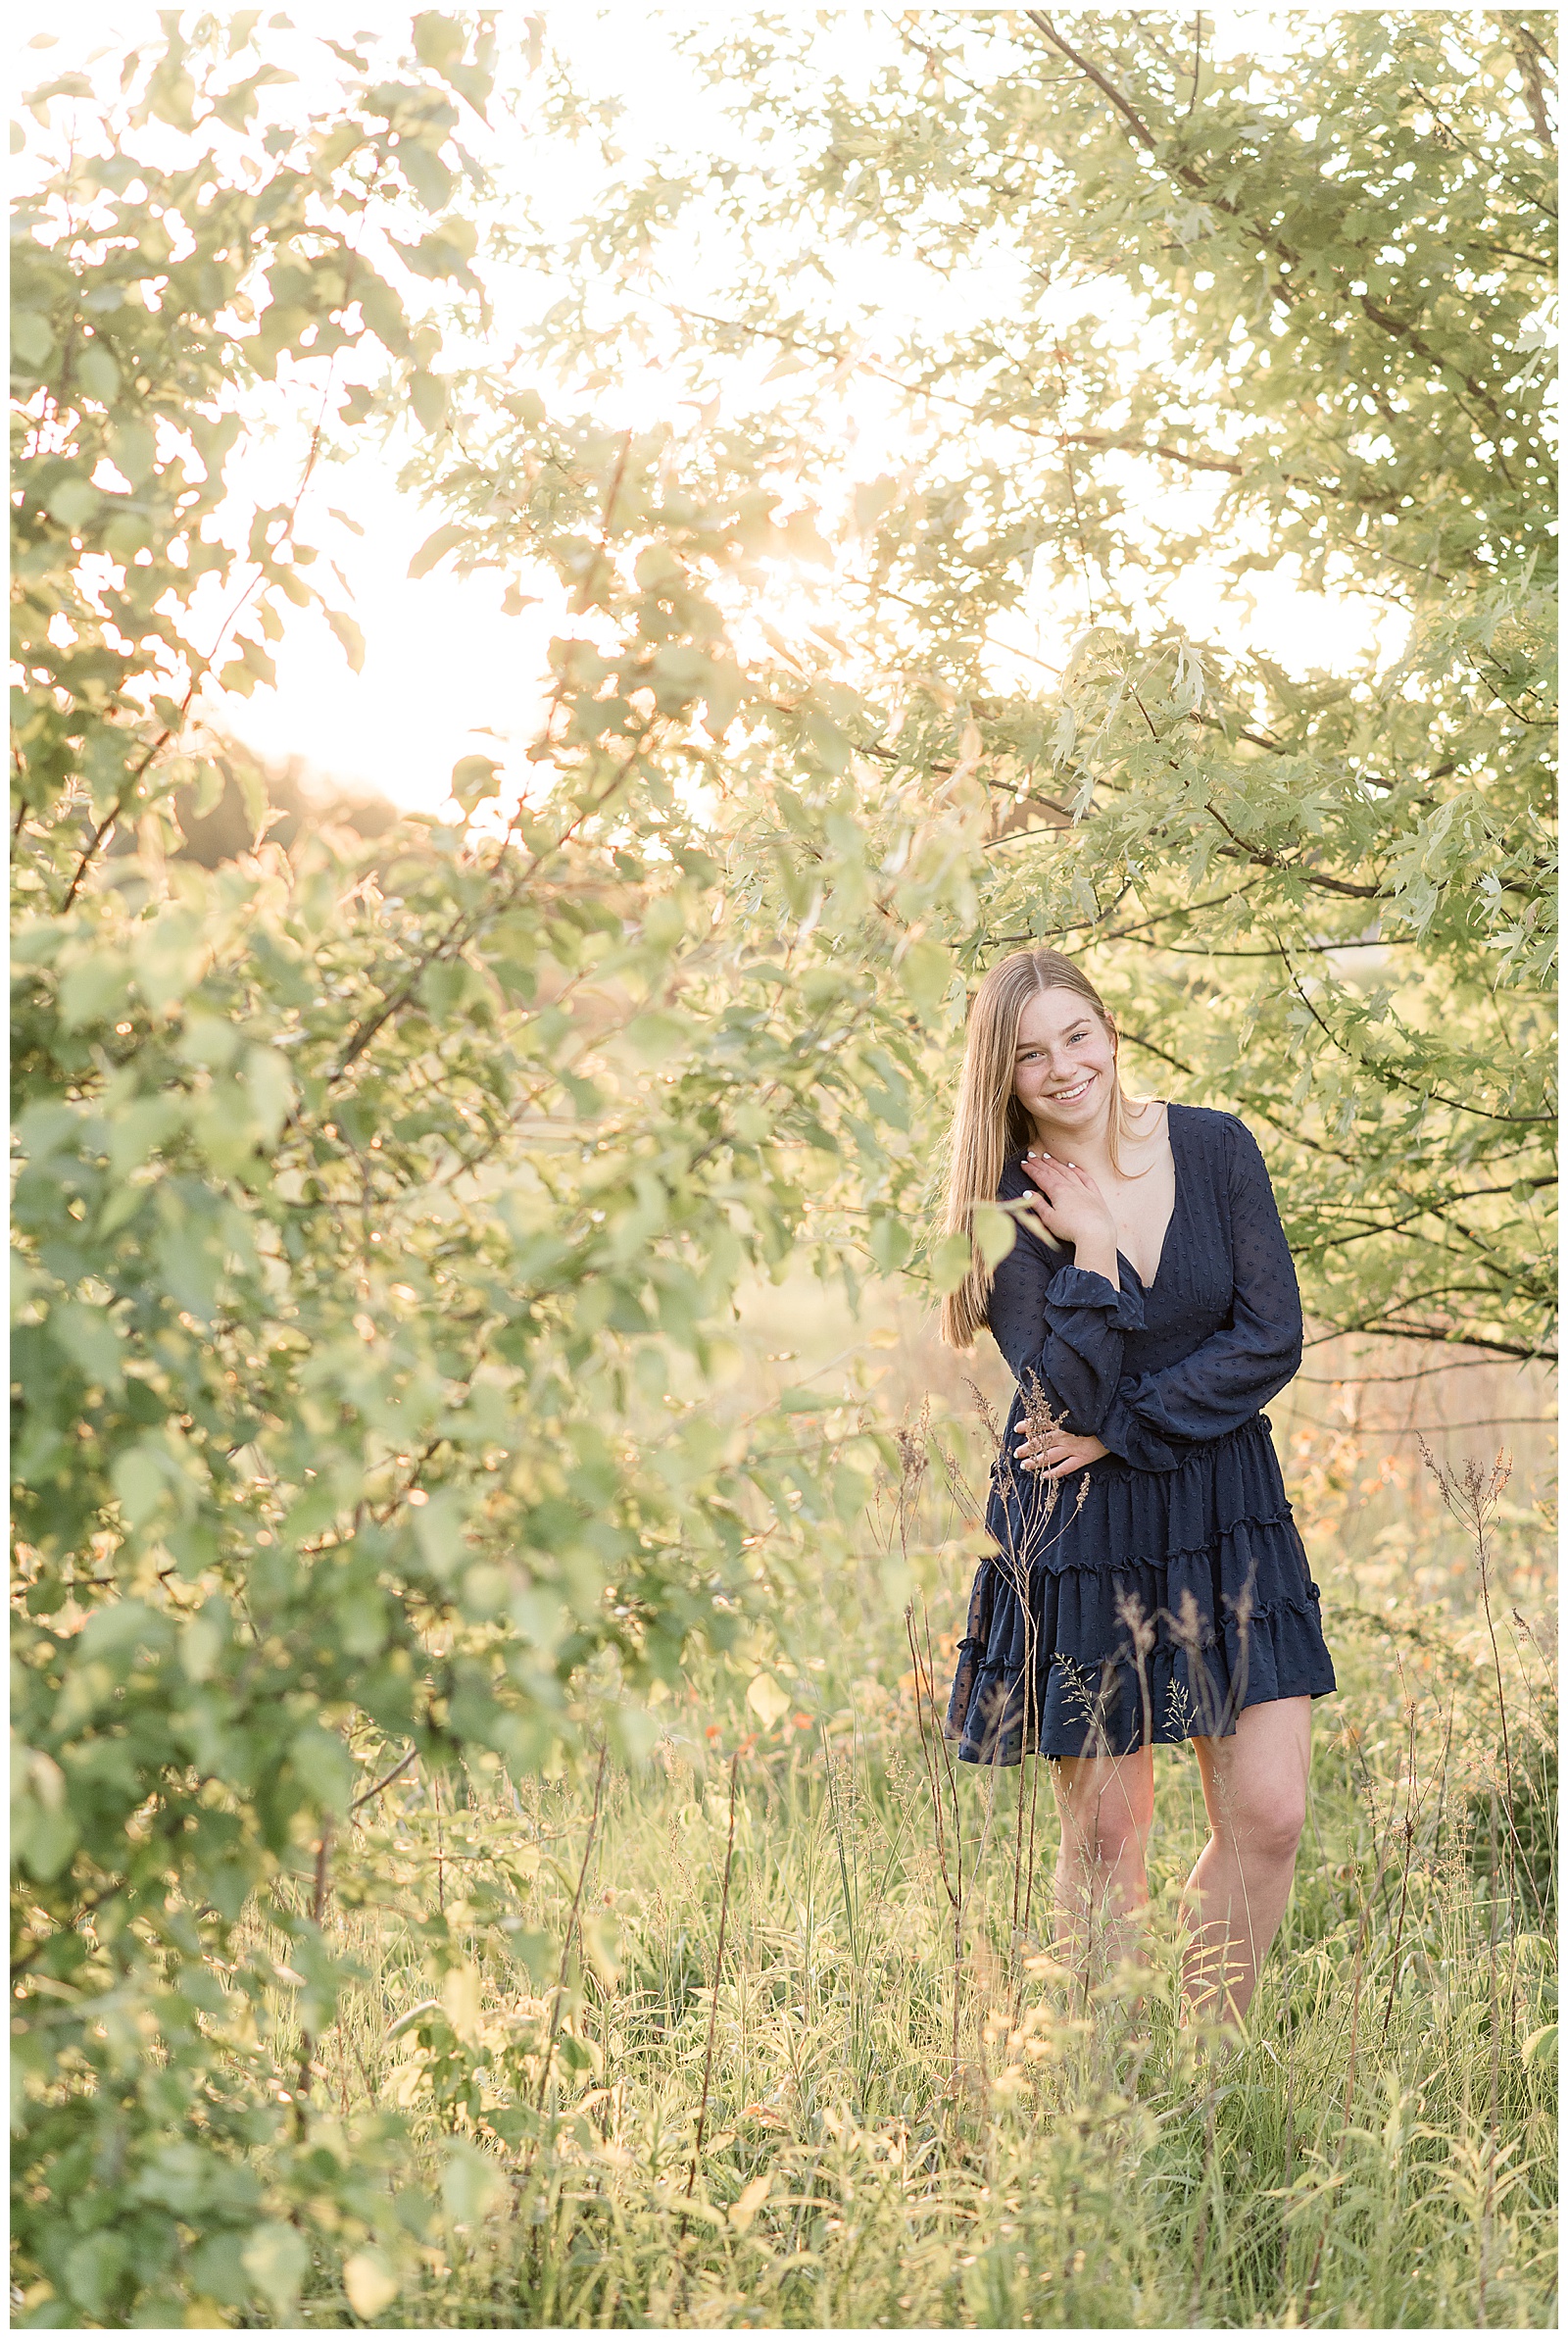 senior girl standing near tree branches with bright sun shining behind her as she smiles at camera at overlook park